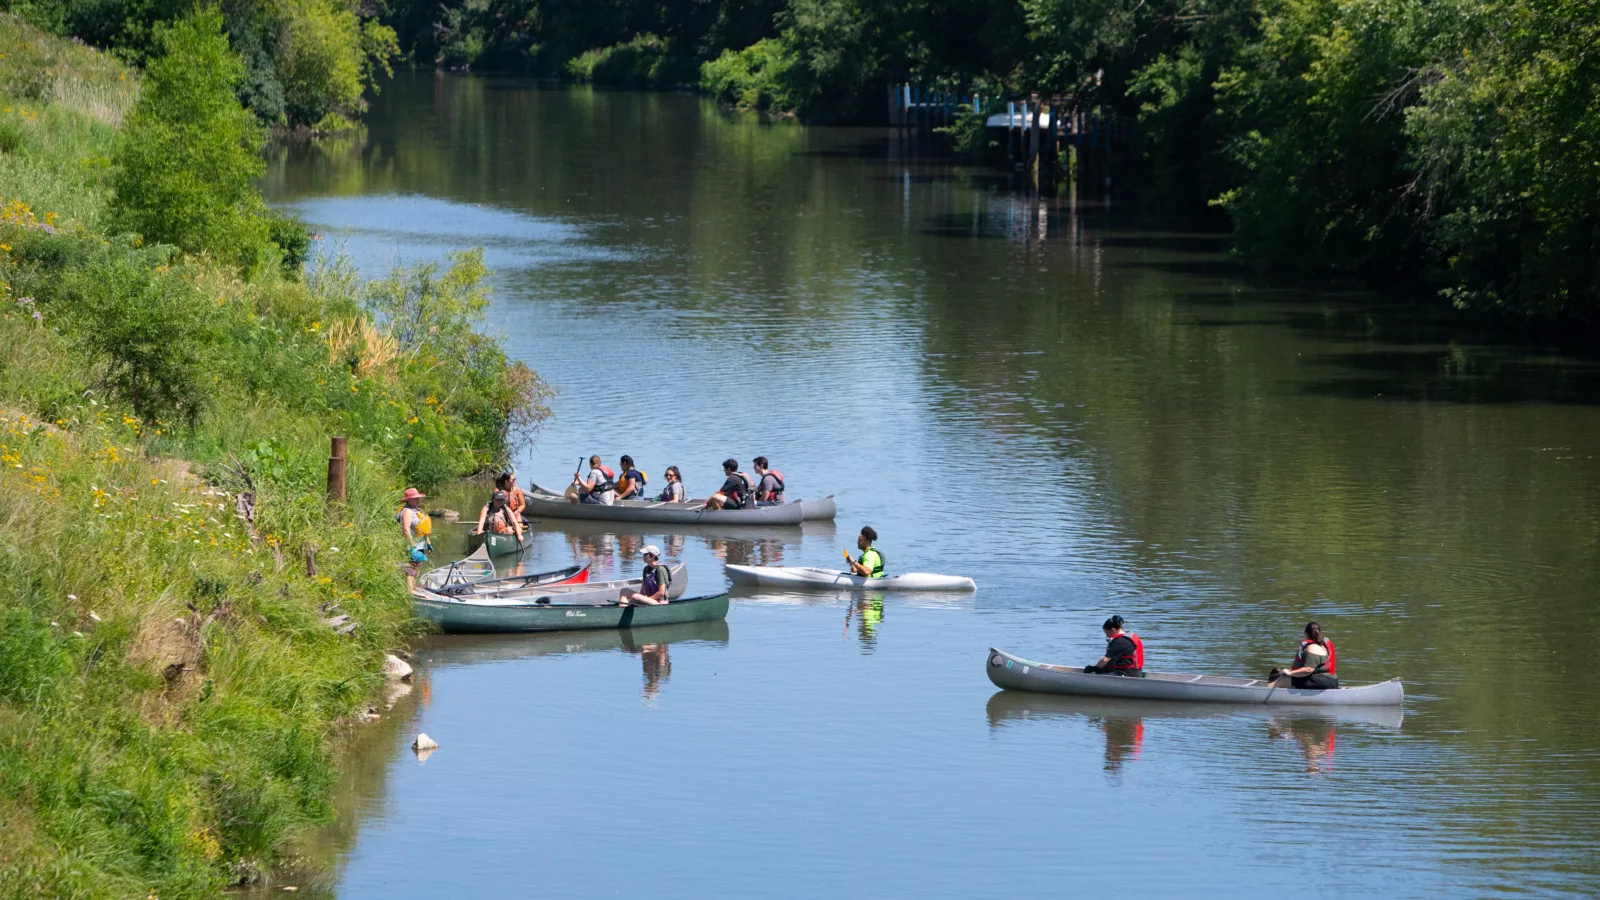 NCAIS participants paddle down the Chicago River as part of the 2022 summer institute programming.